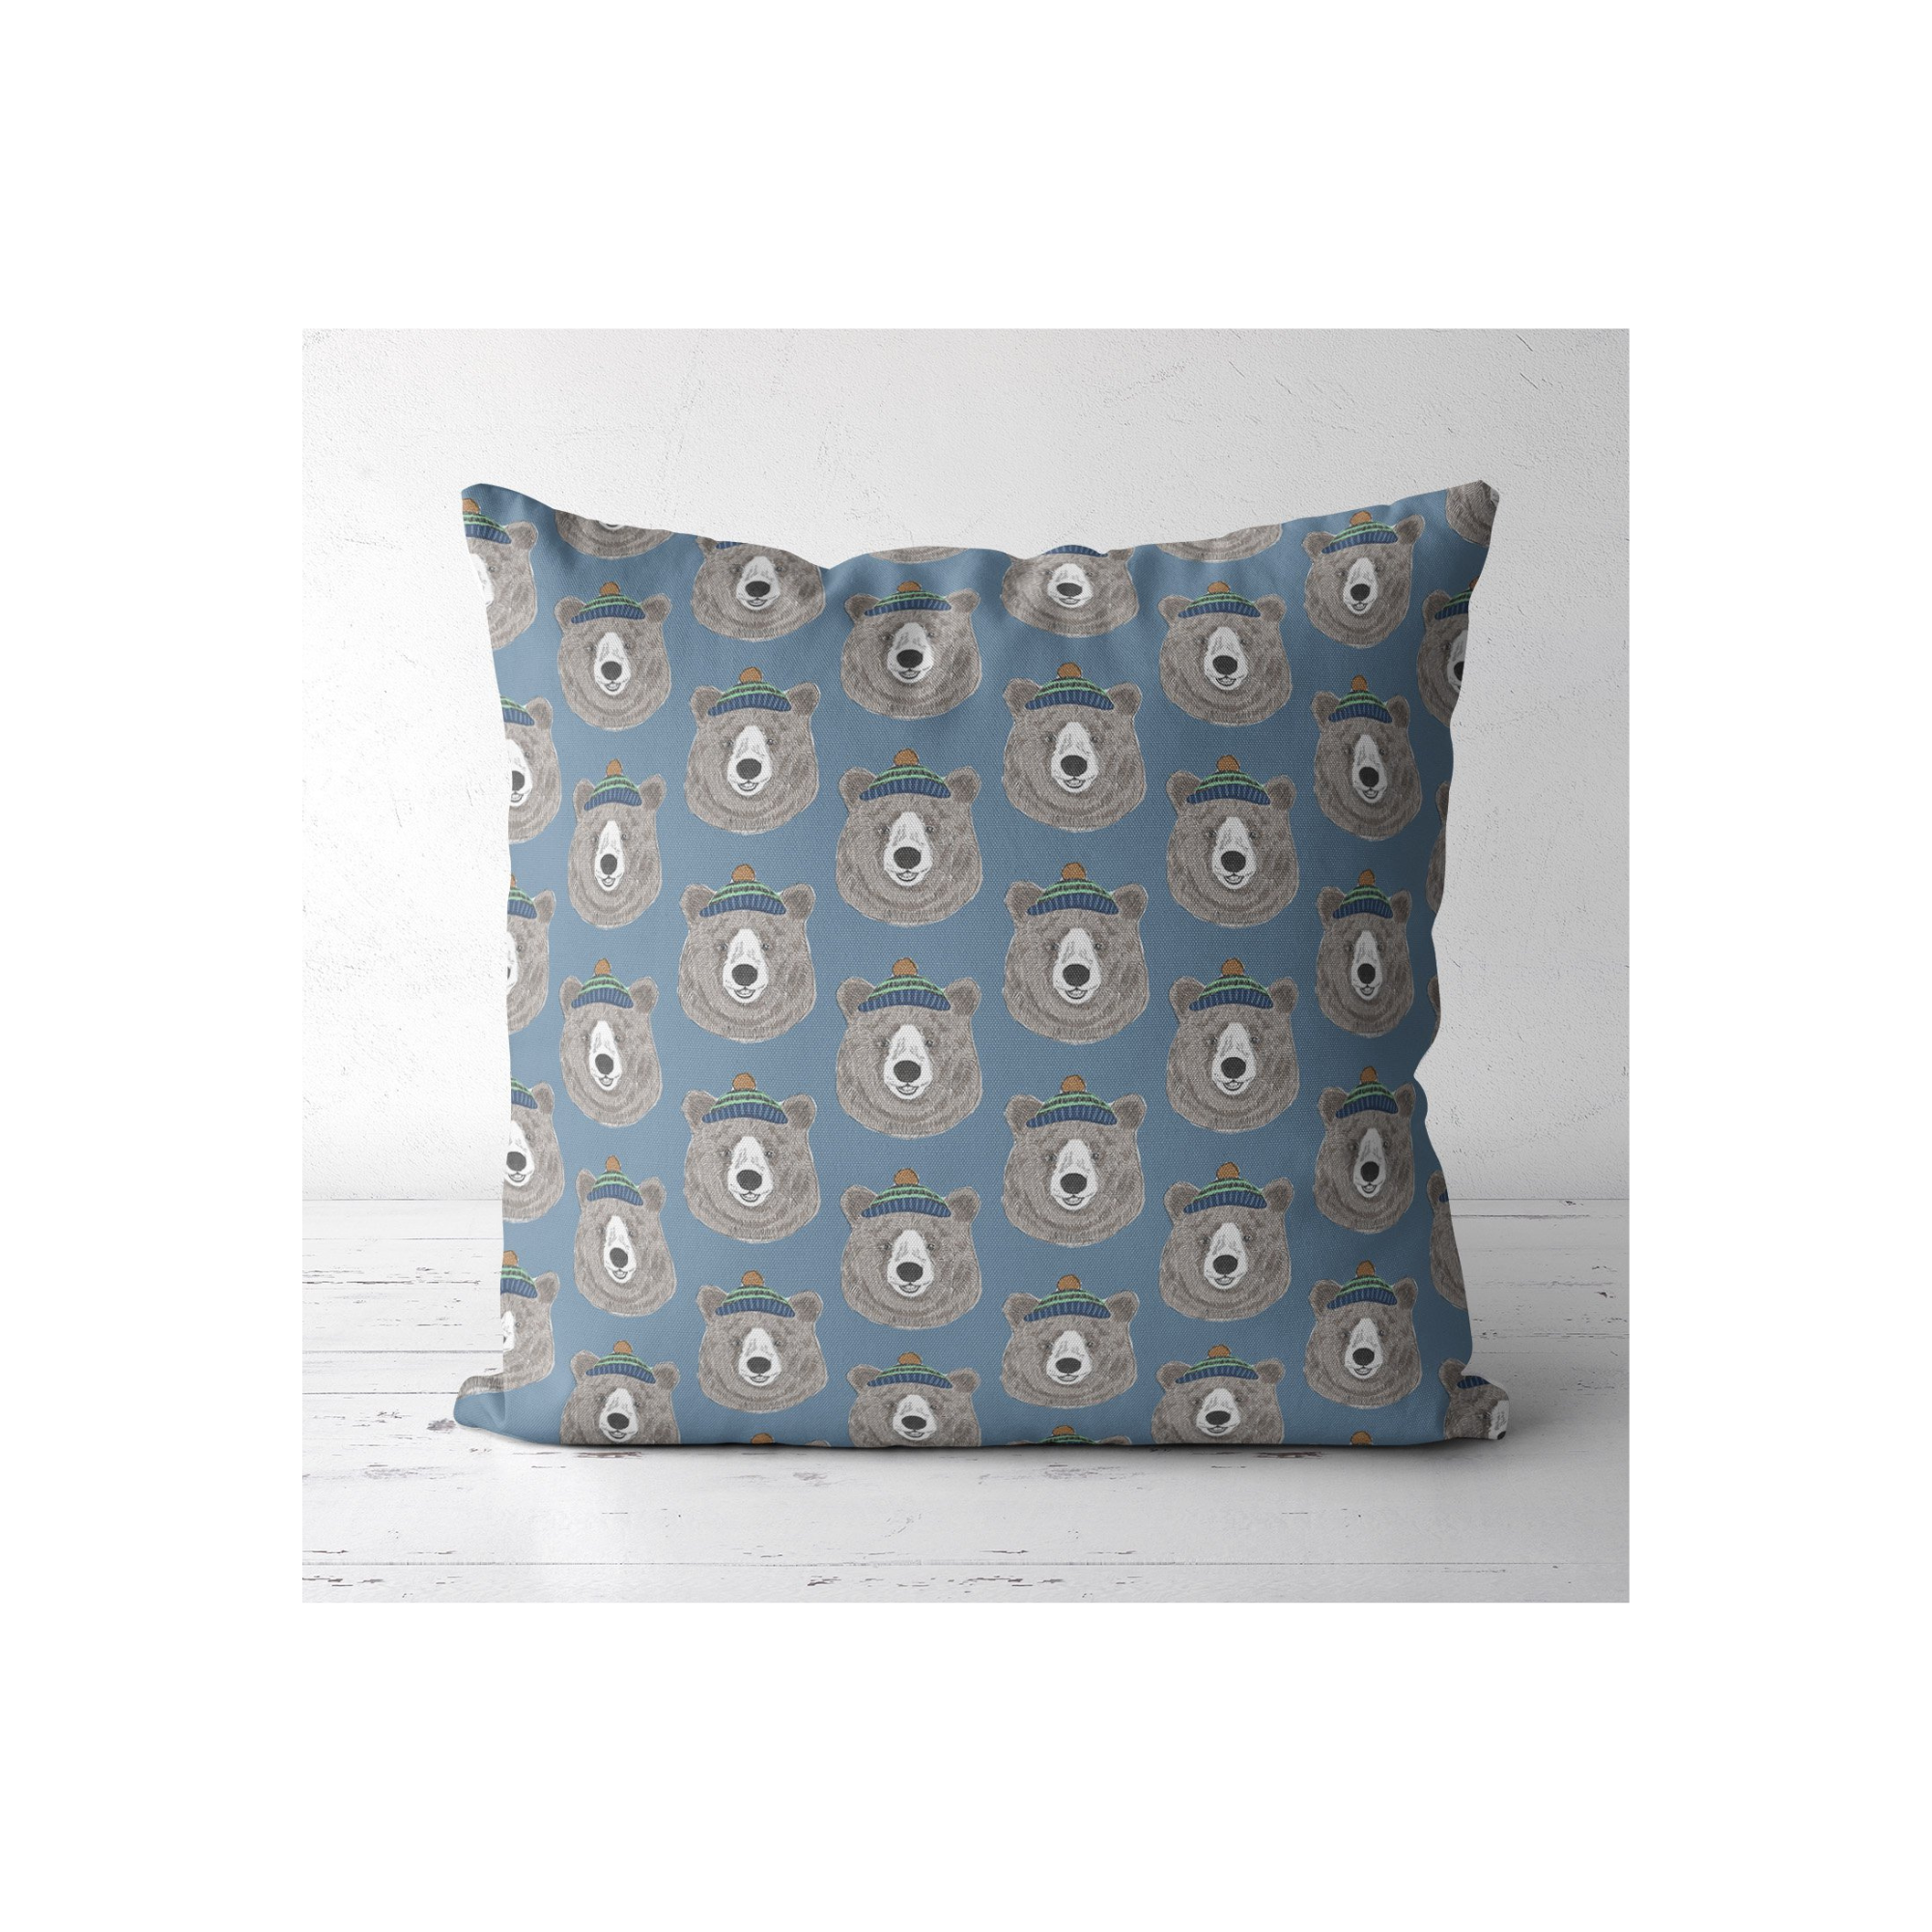 Throw pillow covers are available in 18 inch and 20 inch sizes.  They come with a zipper for easy washing. Inserts not included.